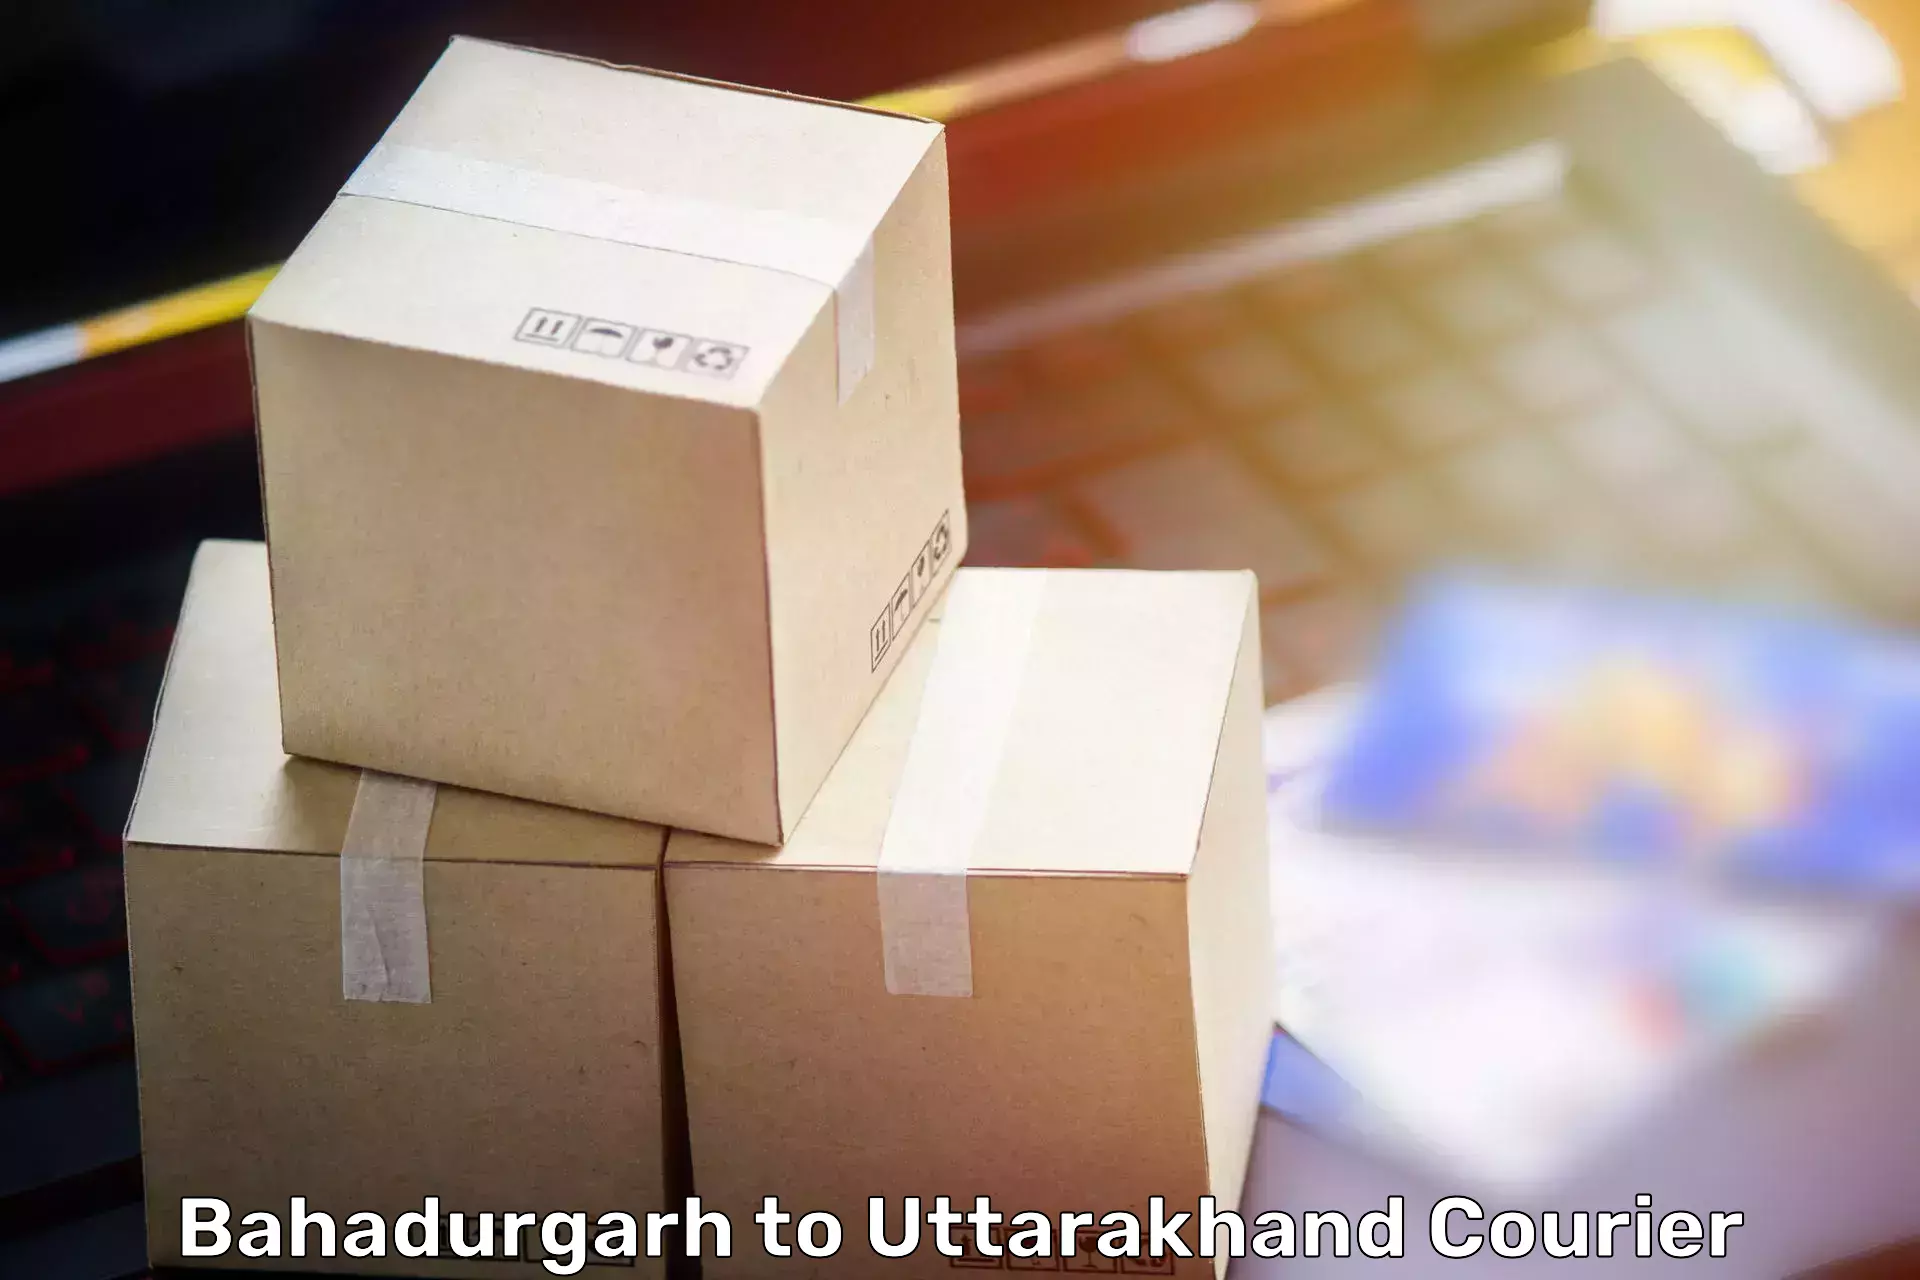 Quality moving and storage in Bahadurgarh to Kashipur